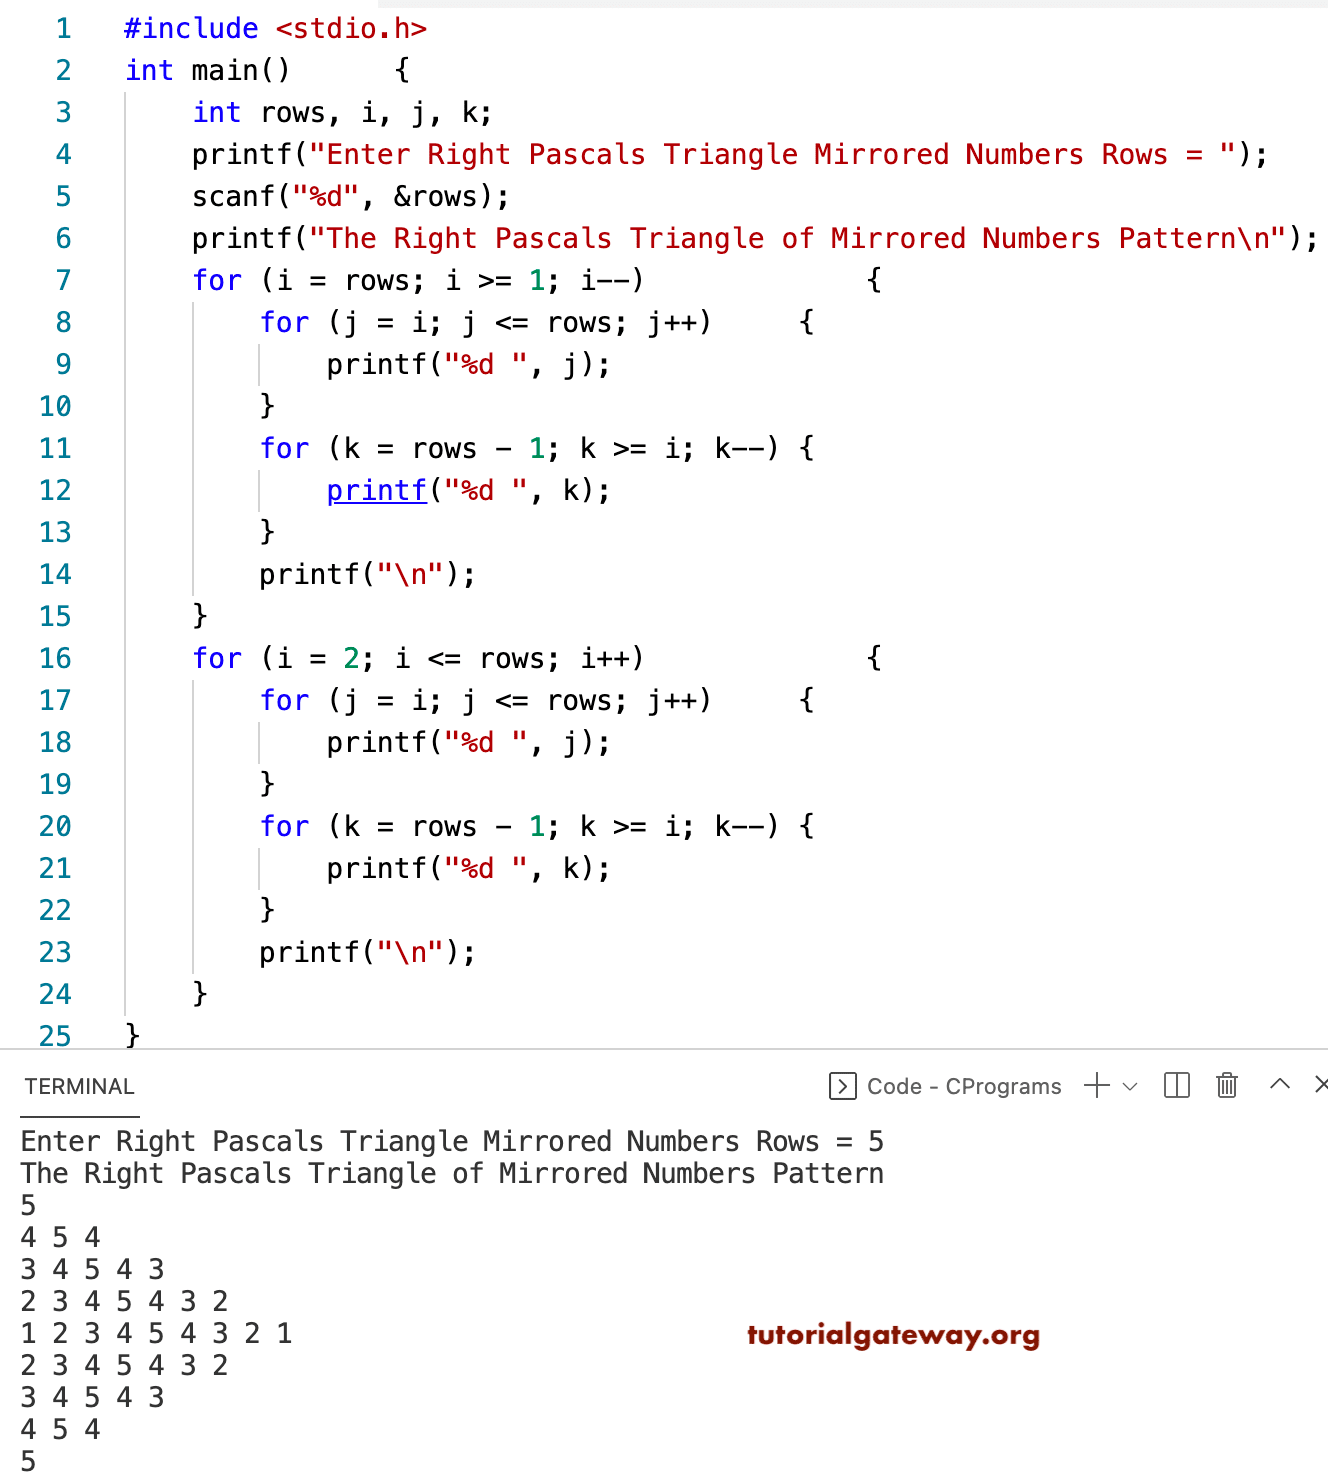 C Program to Print Right Pascals Triangle of Mirrored Numbers Pattern